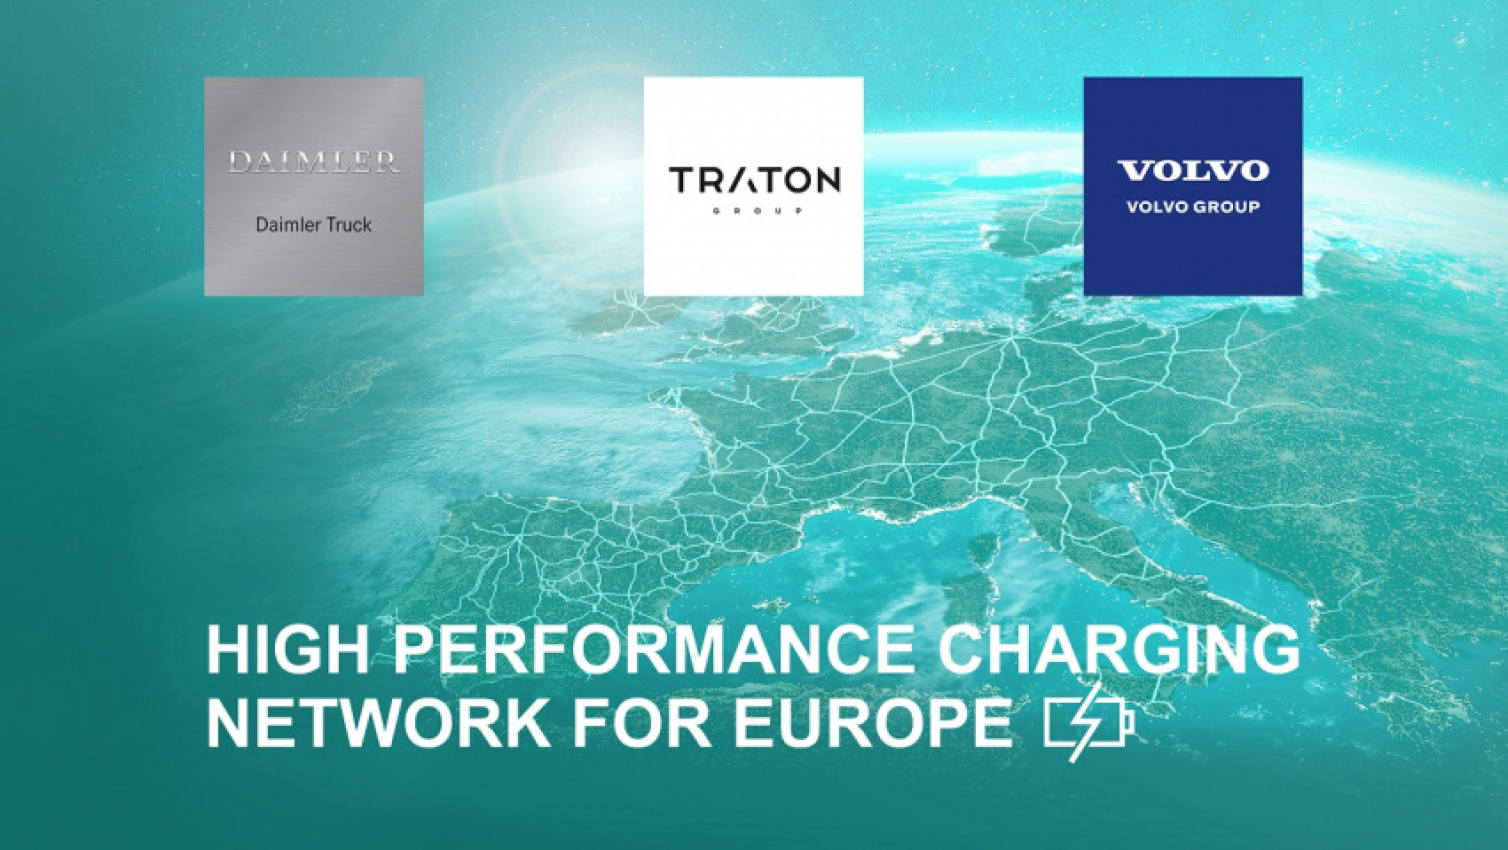 autos, cars, commercial vehicles, volvo, buses, commercial vehicles, daimler truck, daimler truck & bus, logistics, transportation, traton group, trucks, volvo group, volvo, daimler and traton to jointly invest in charging network for trucks & buses